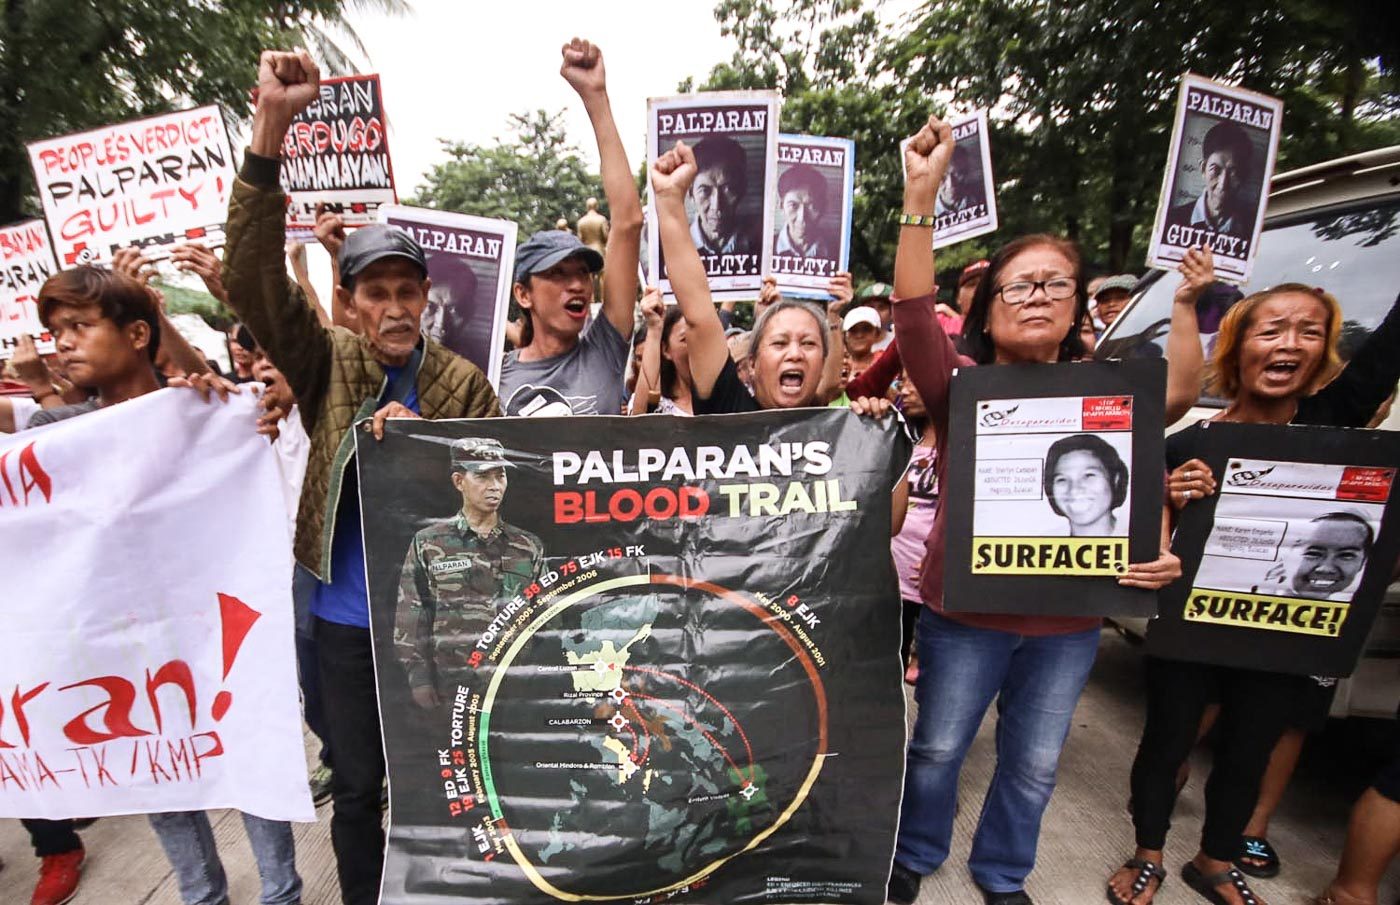 Palparan: ‘We’ve got to hate the movement’